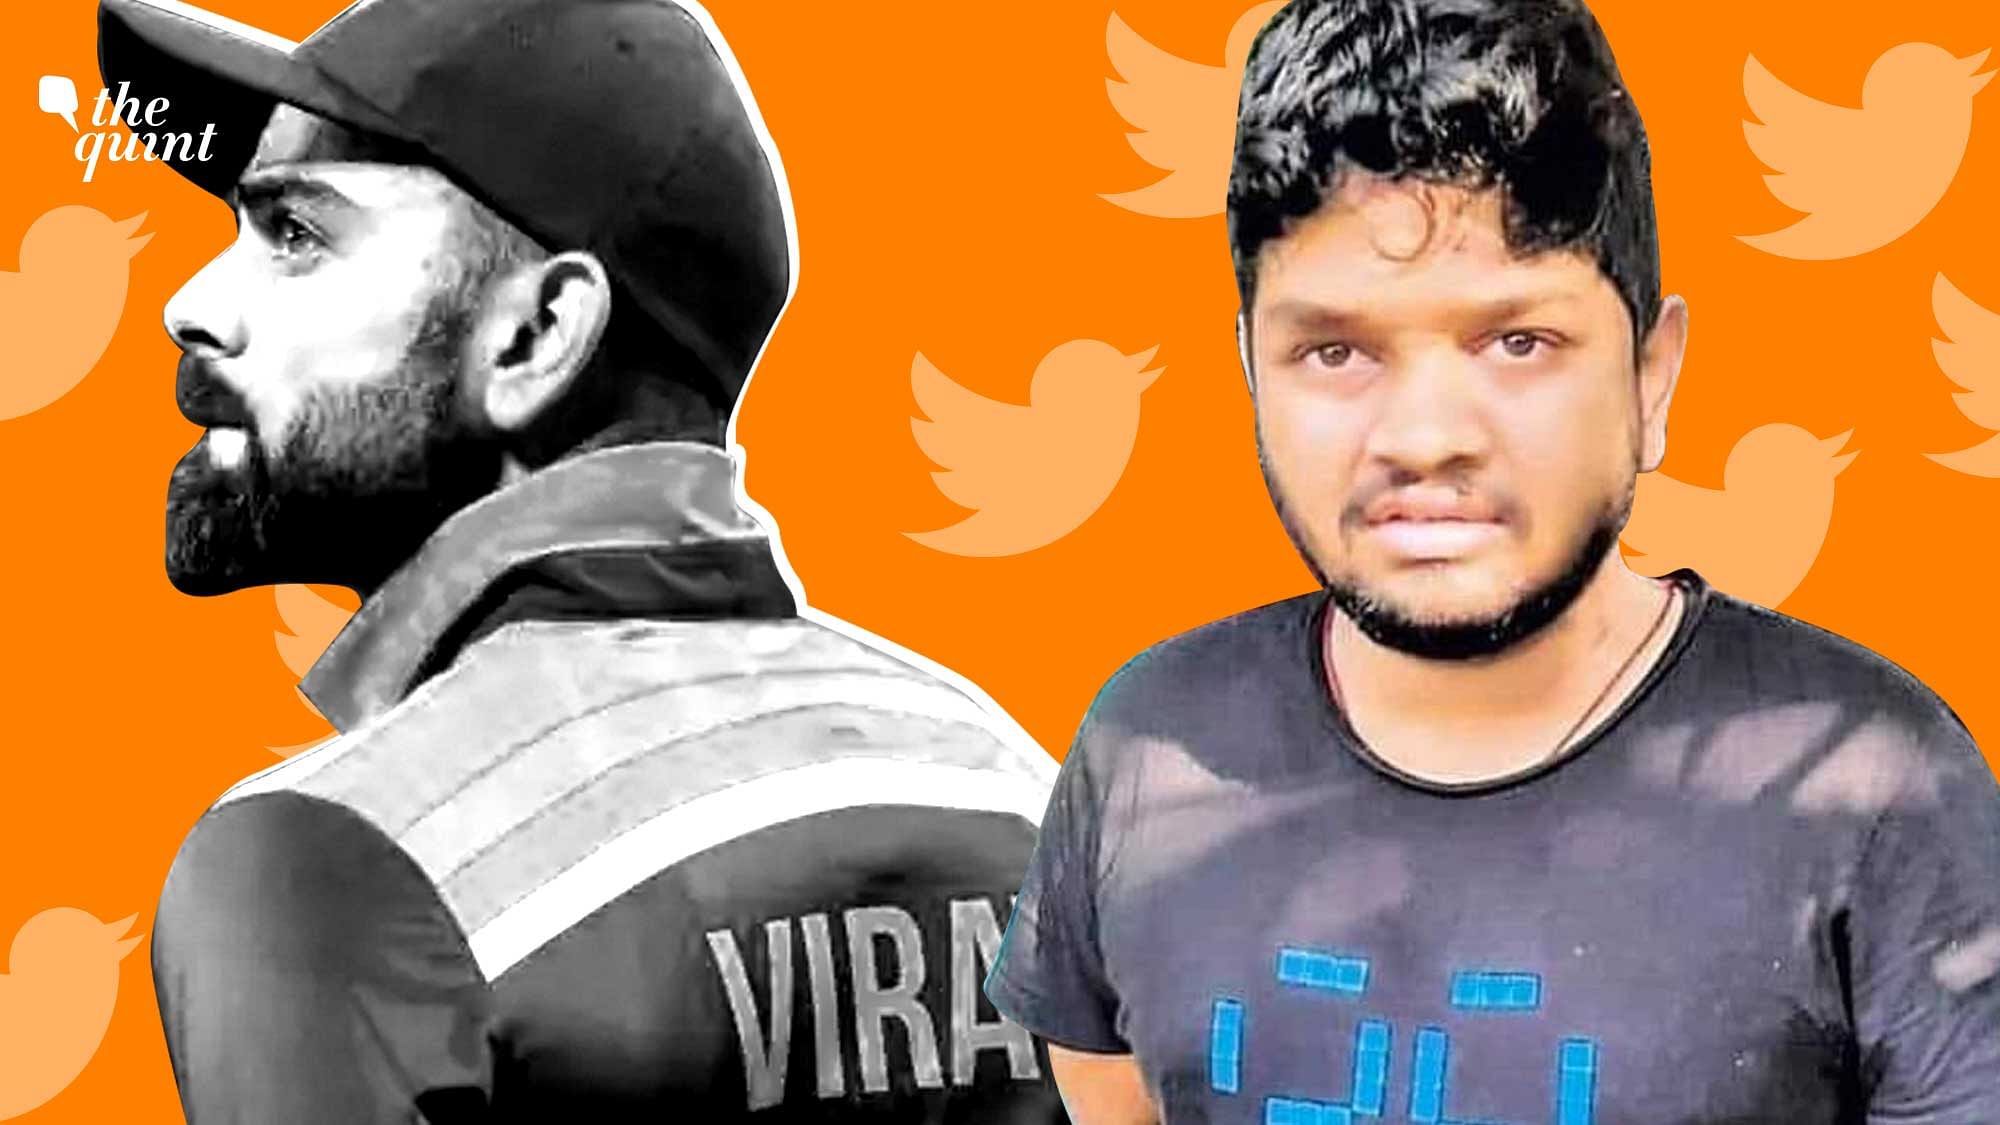 <div class="paragraphs"><p>Ramnagesh Akubathini from Hyderabad was arrested because he tweeted a rape threat targeting Virat Kohli's 10-month-old baby. Image used for representational purposes.</p></div>